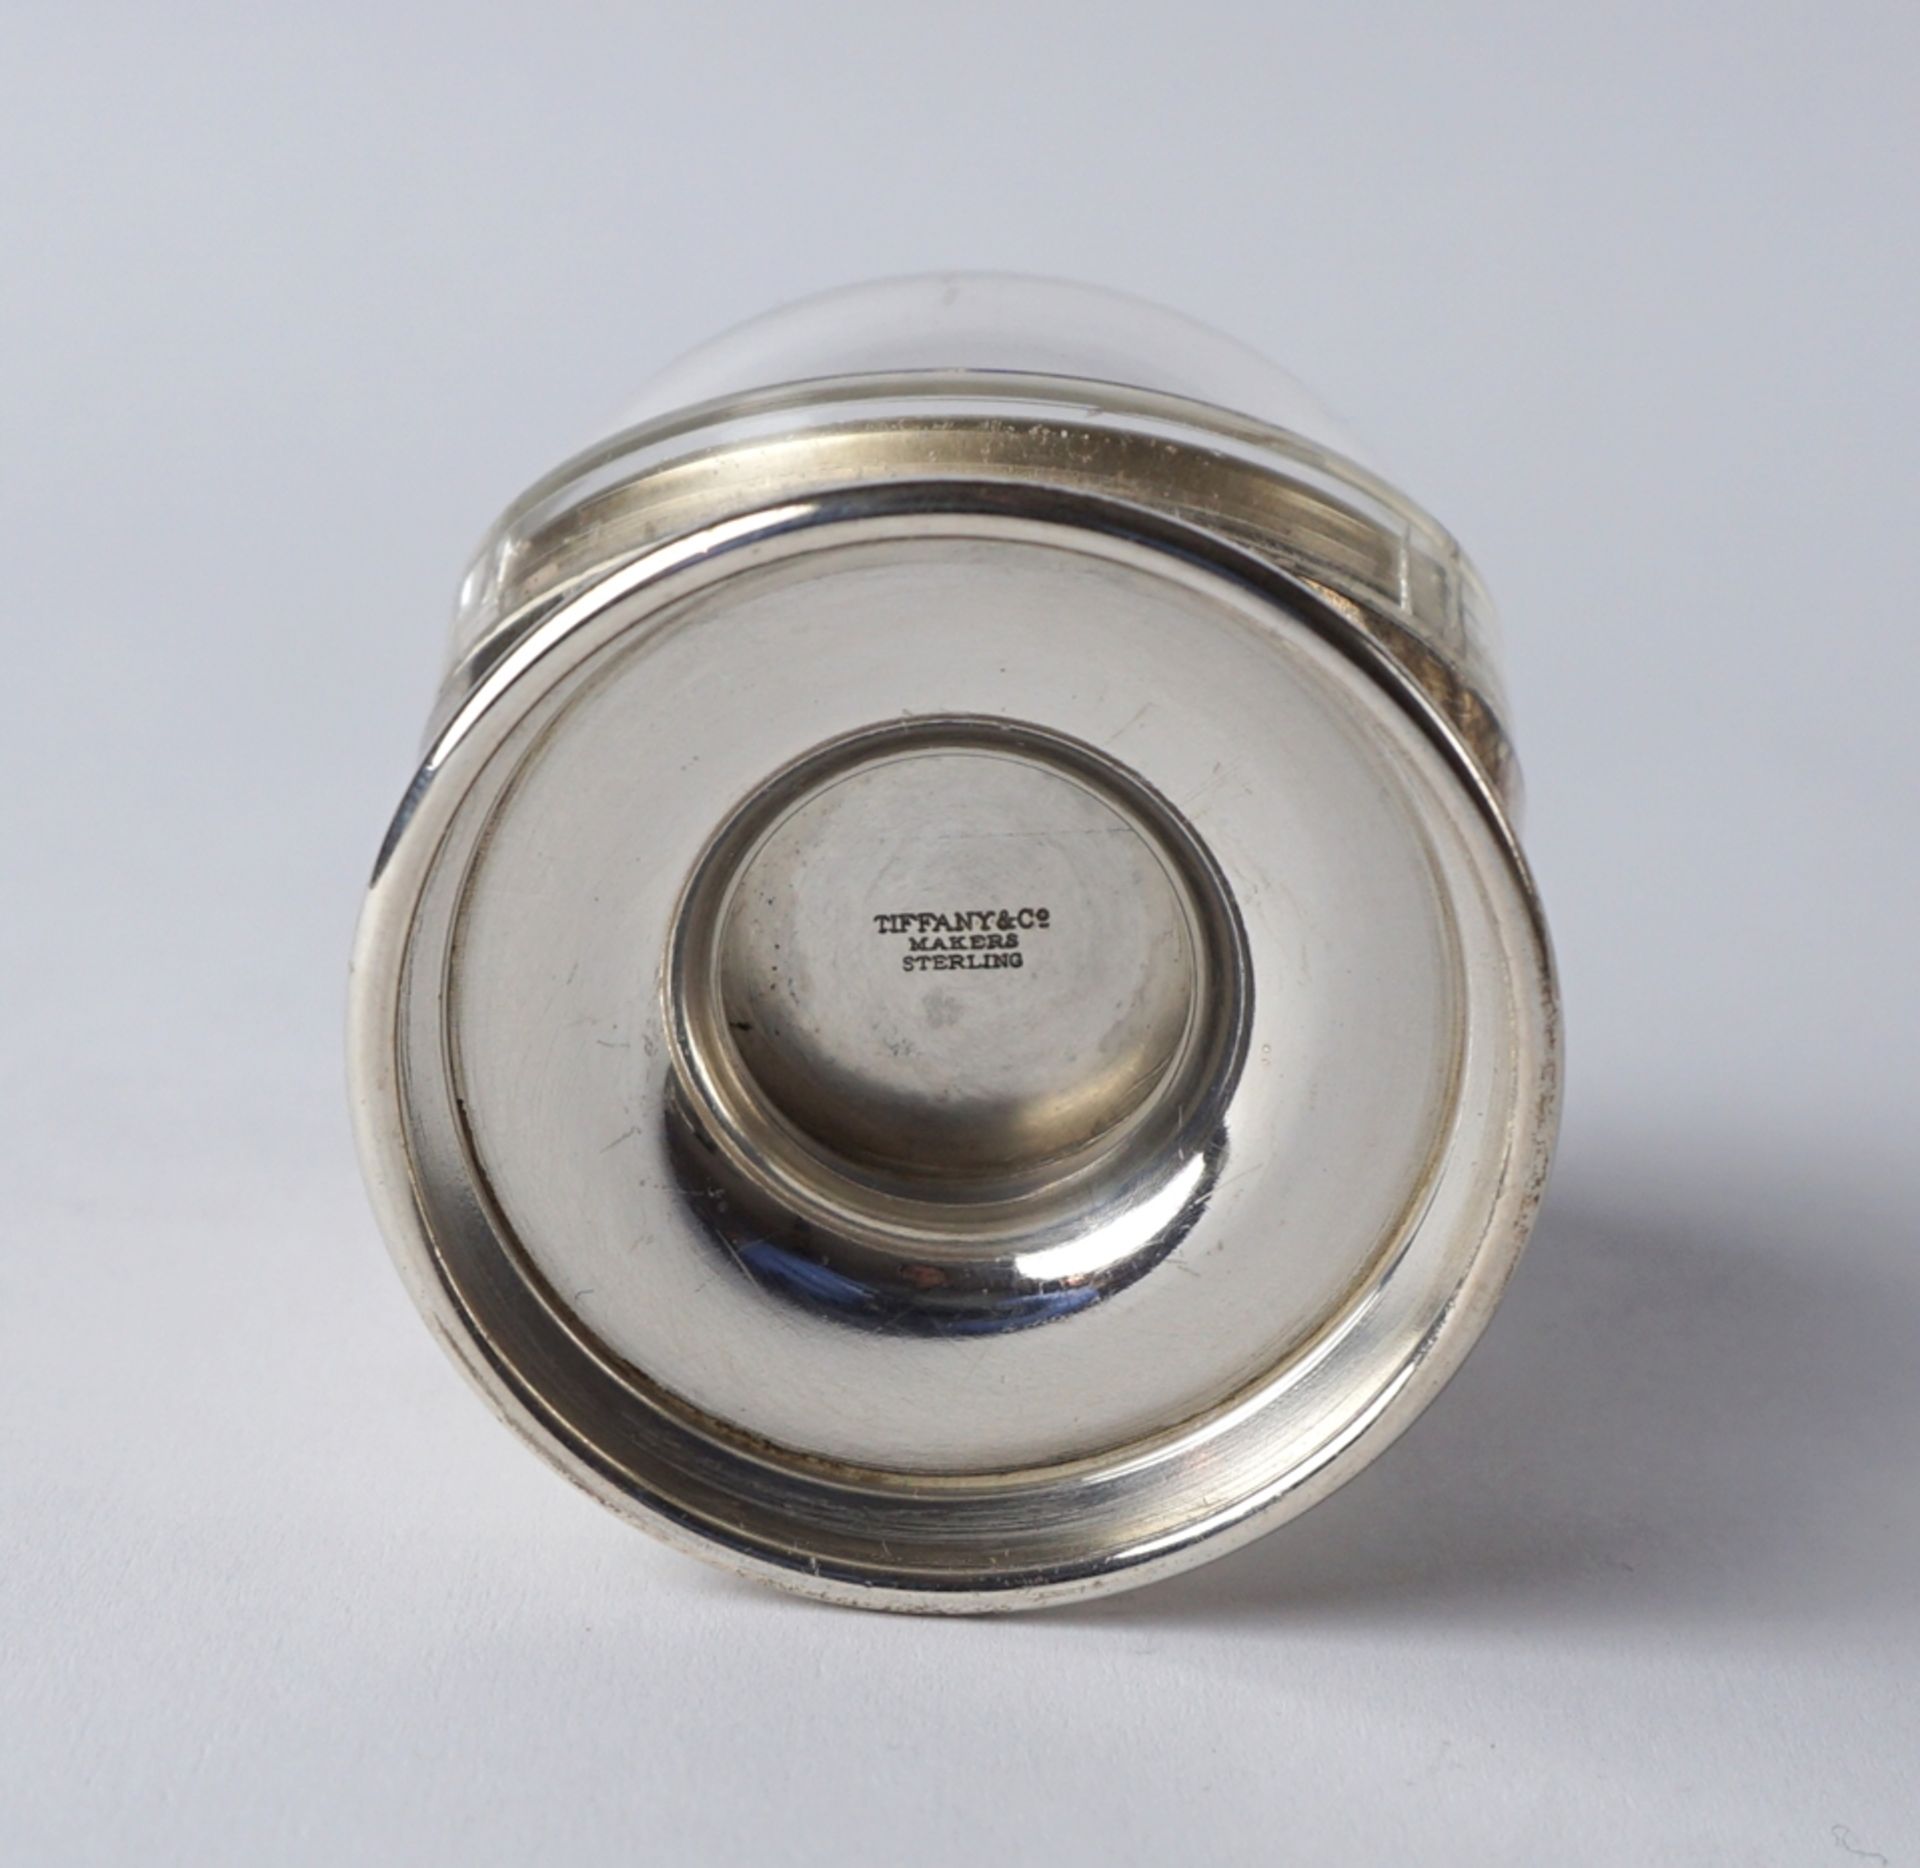 Honeywell table thermometer, Tiffany & Co, 925 sterling silver, 1960s - Image 2 of 2